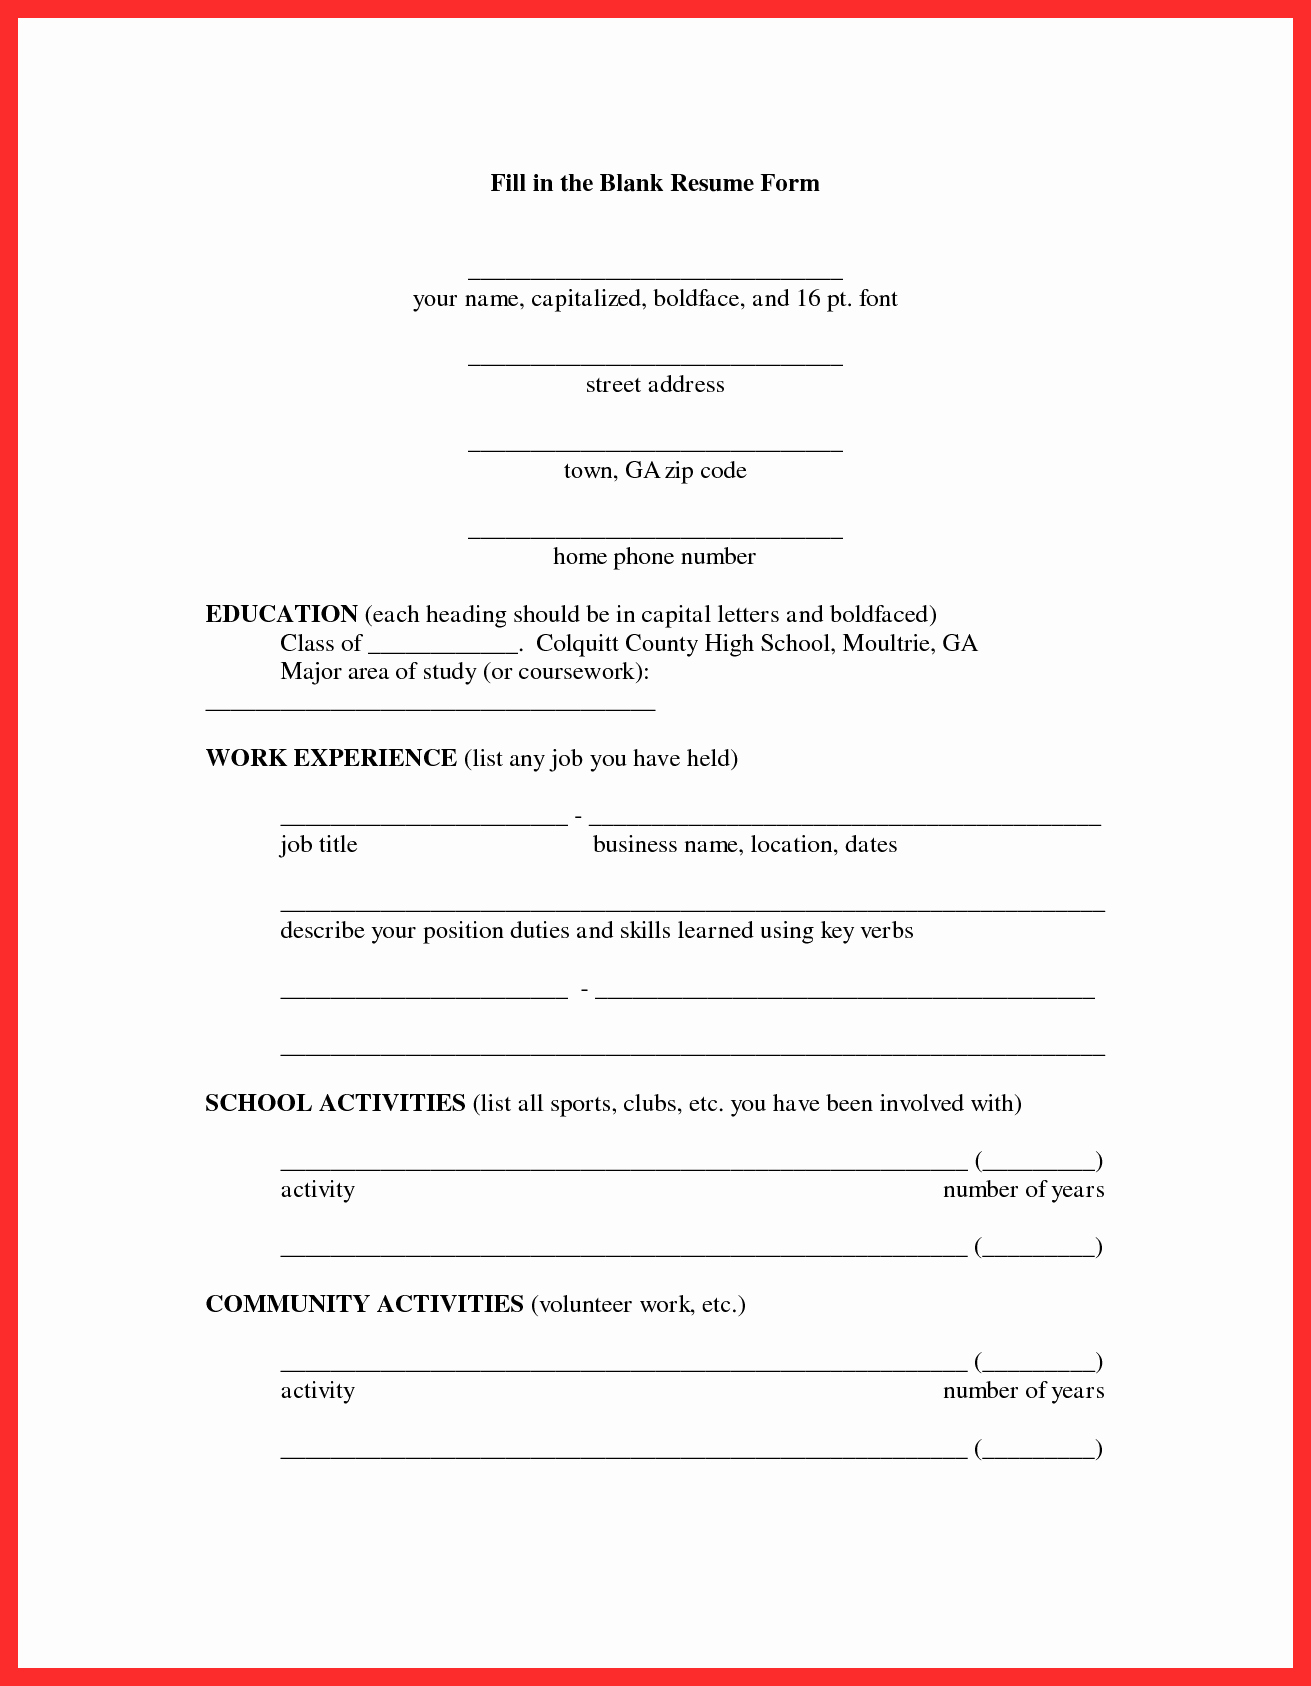 Resume forms to Fill Out Lovely Fill In Resume form